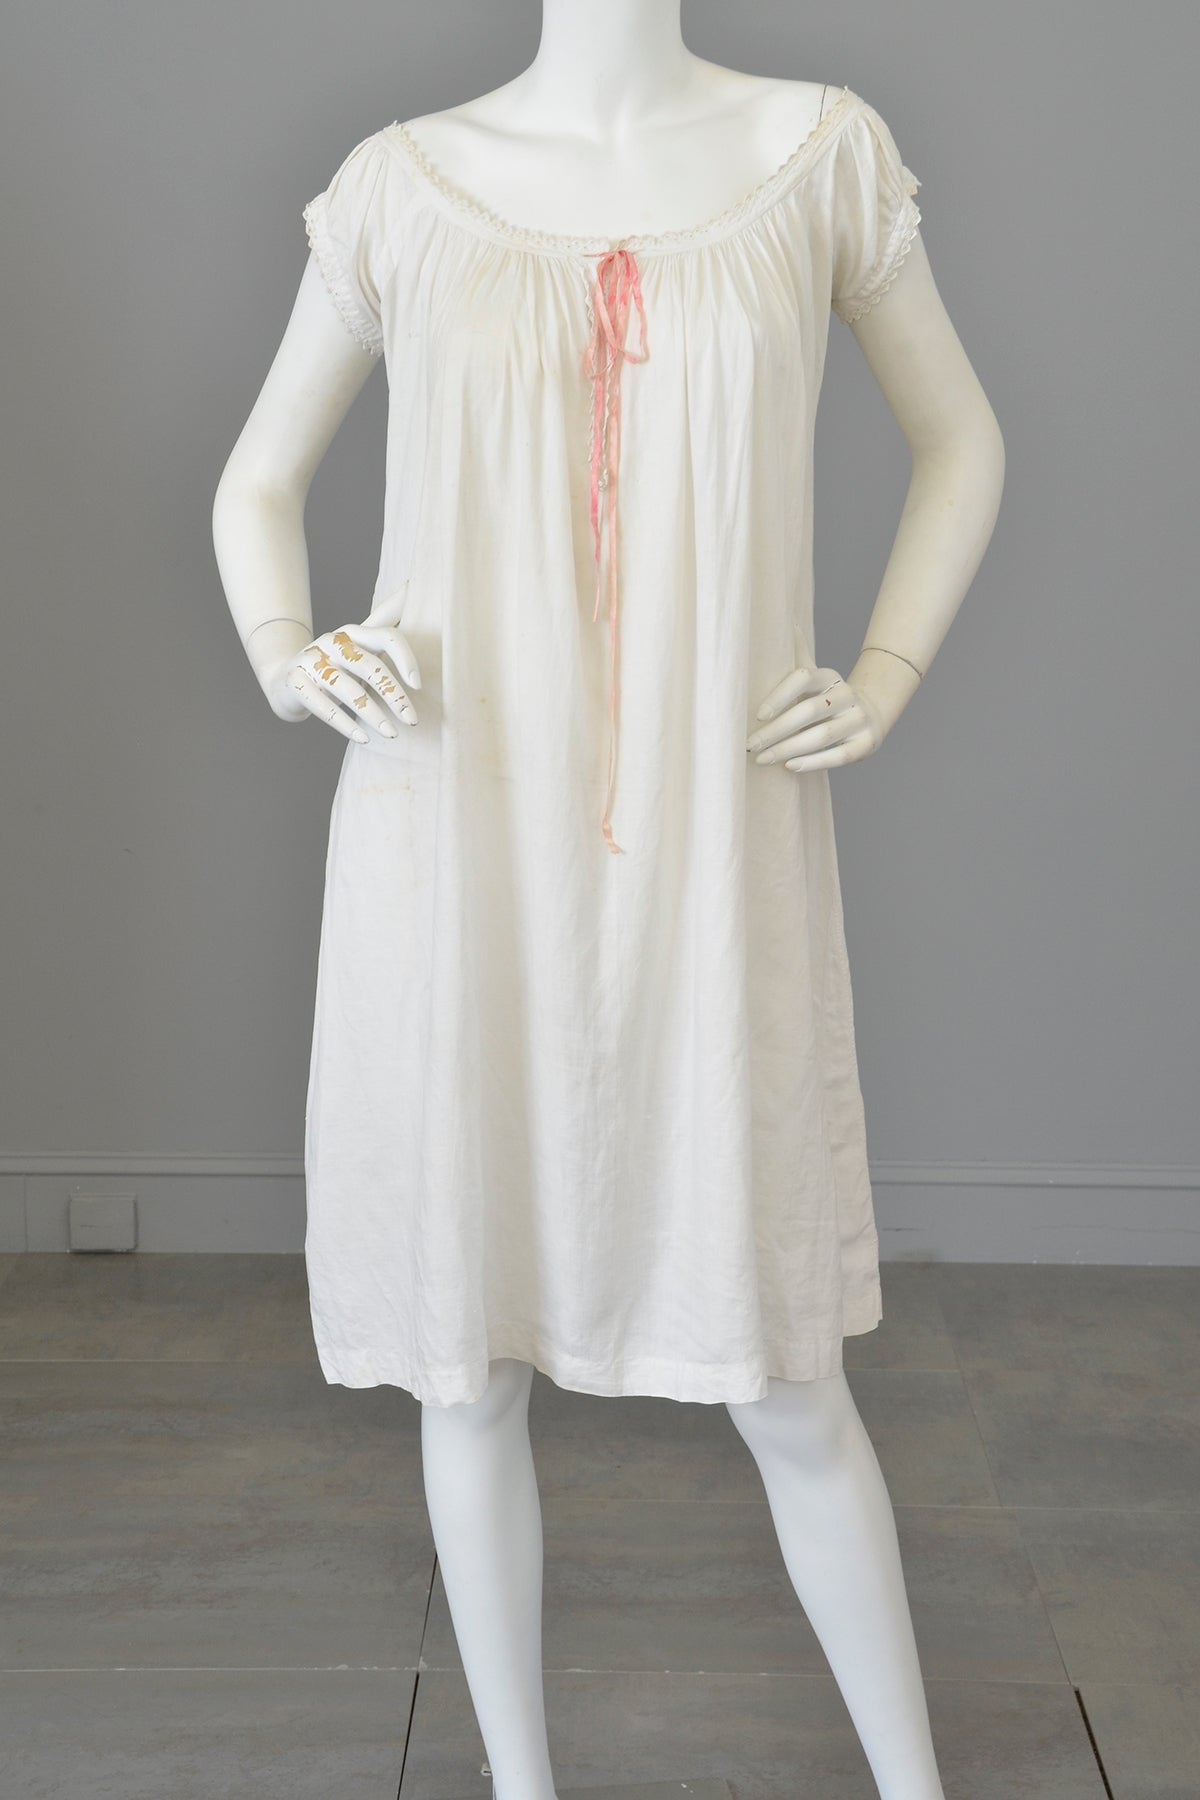 1930s White Linen/Flax Trapeze Peasant Nightie Dress | 1930s Peasant Style Dress